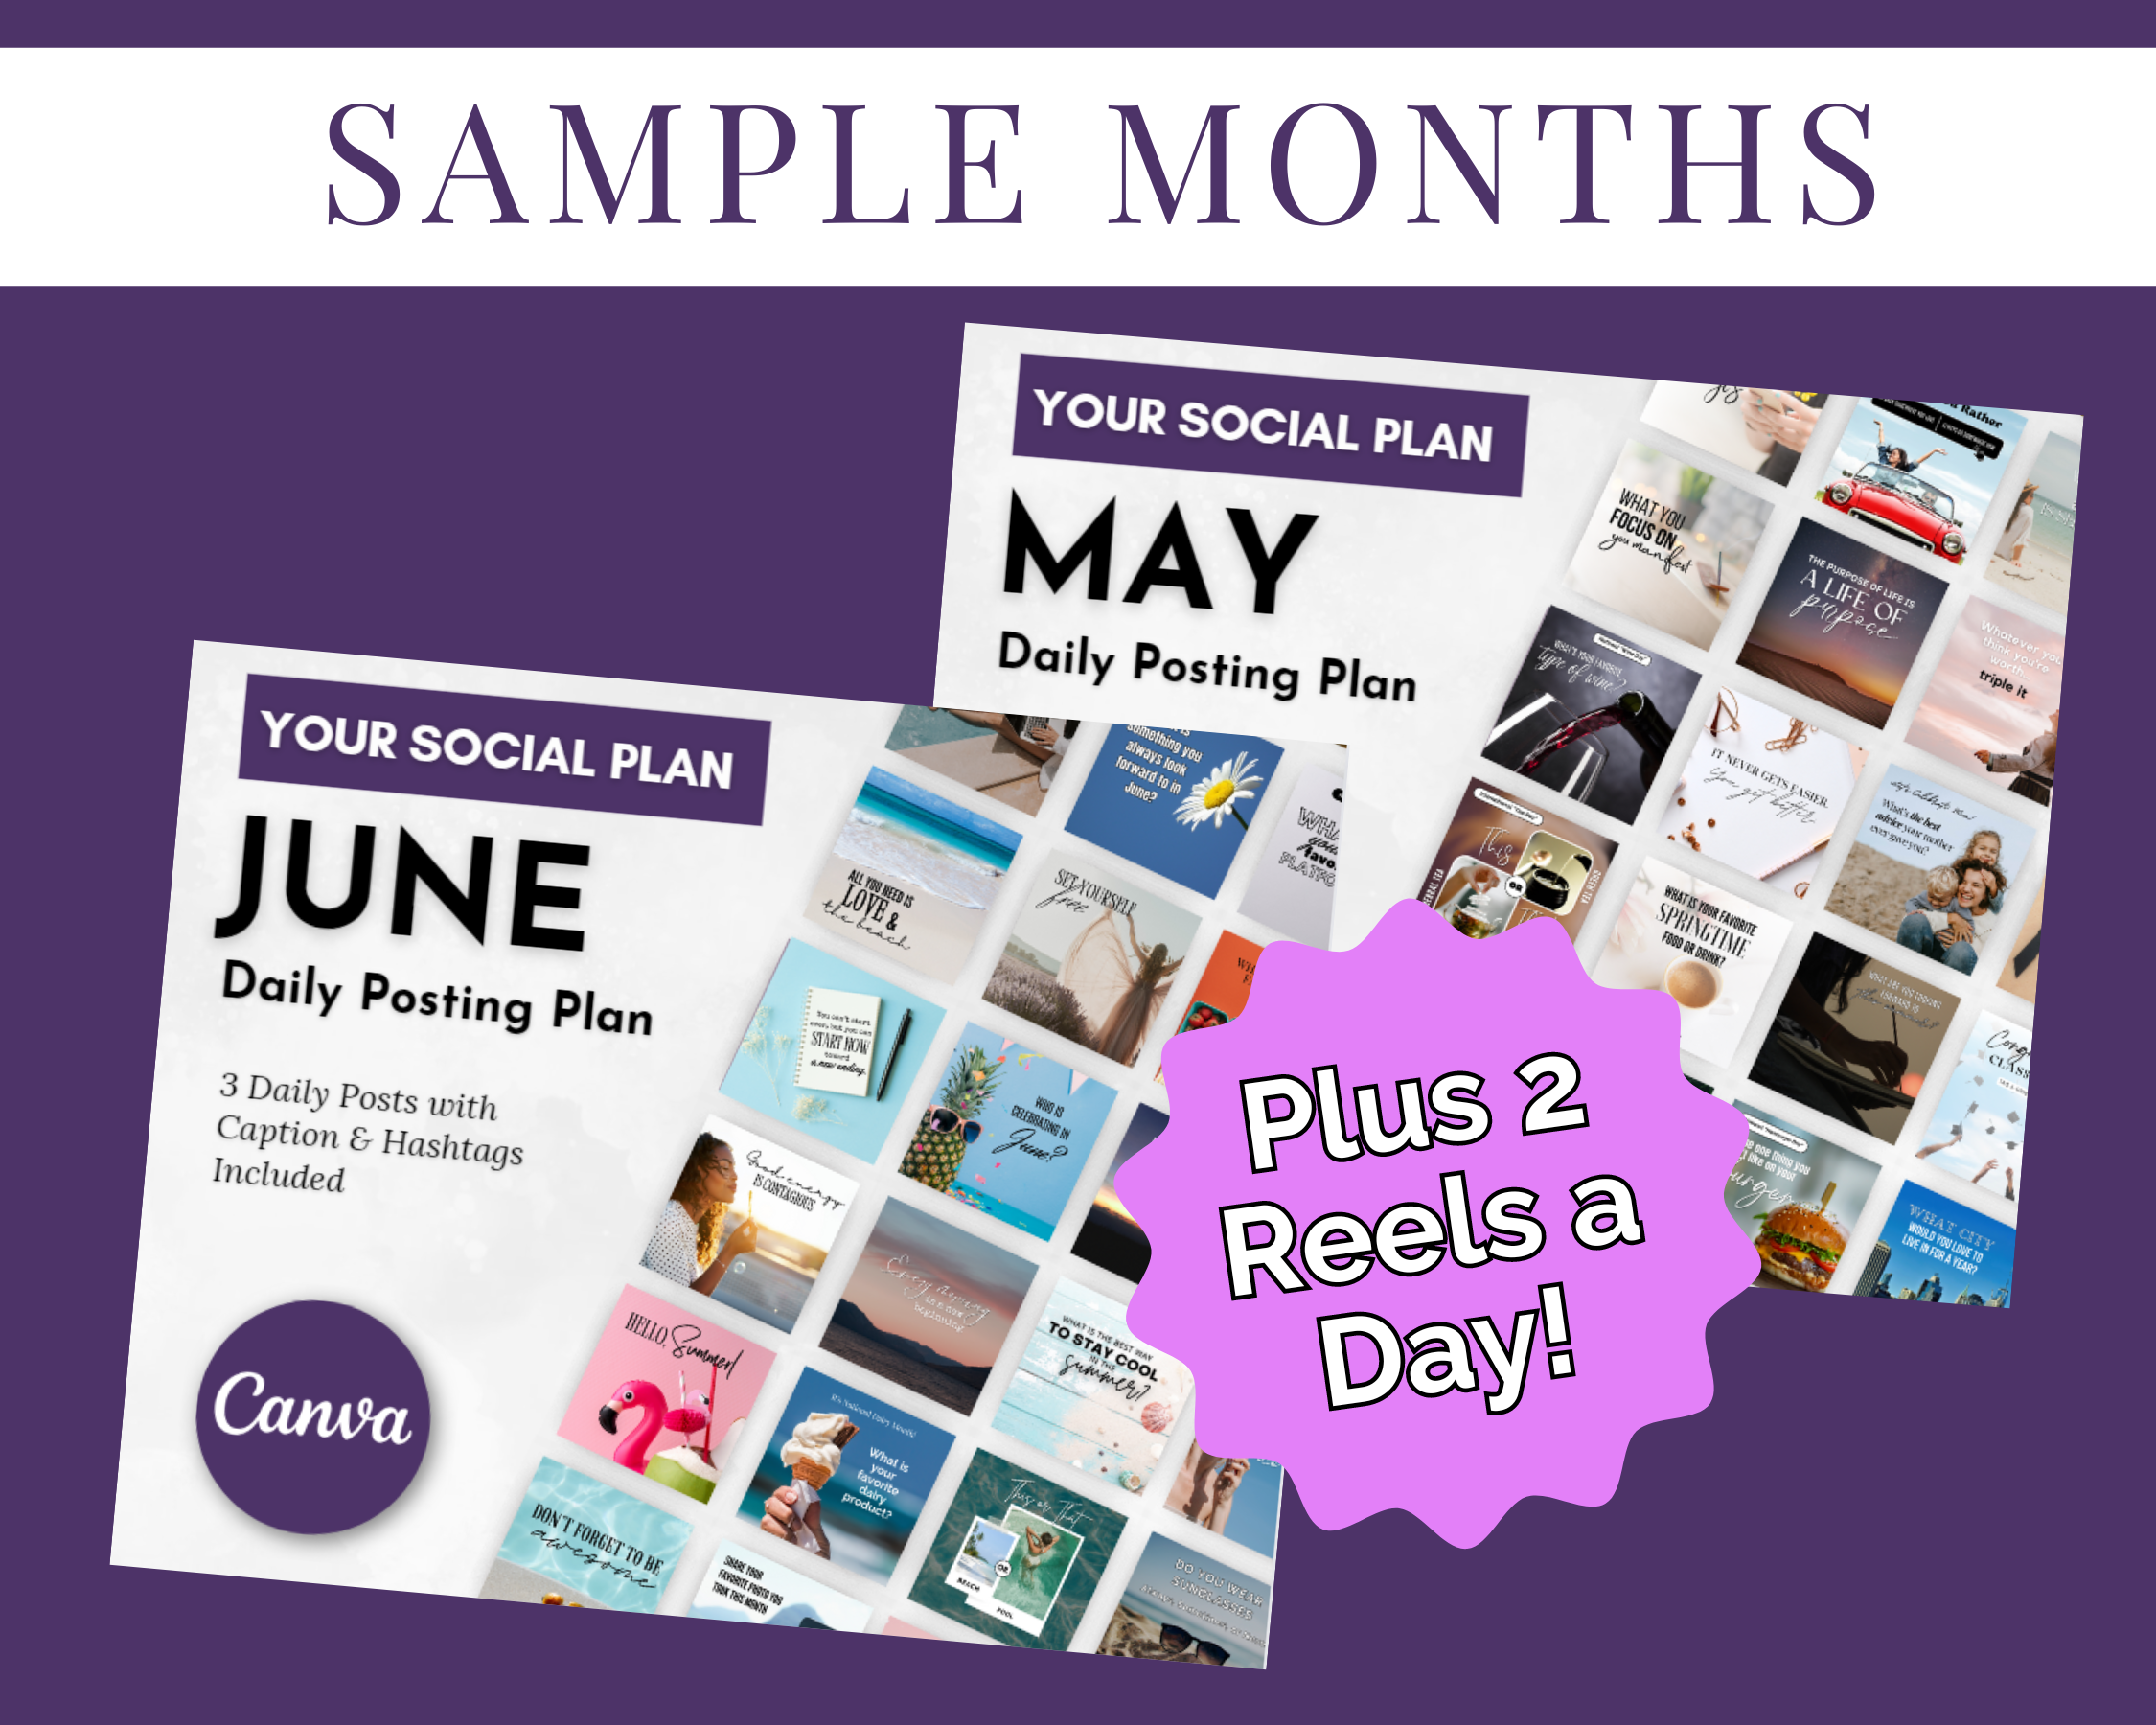 Promotional graphic showing a daily posting plan for May and June, featuring three daily posts and two reels a day, packed with done-for-you content perfect for business-building prompts from Your Social Plan Content Membership by Get Socially Inclined.